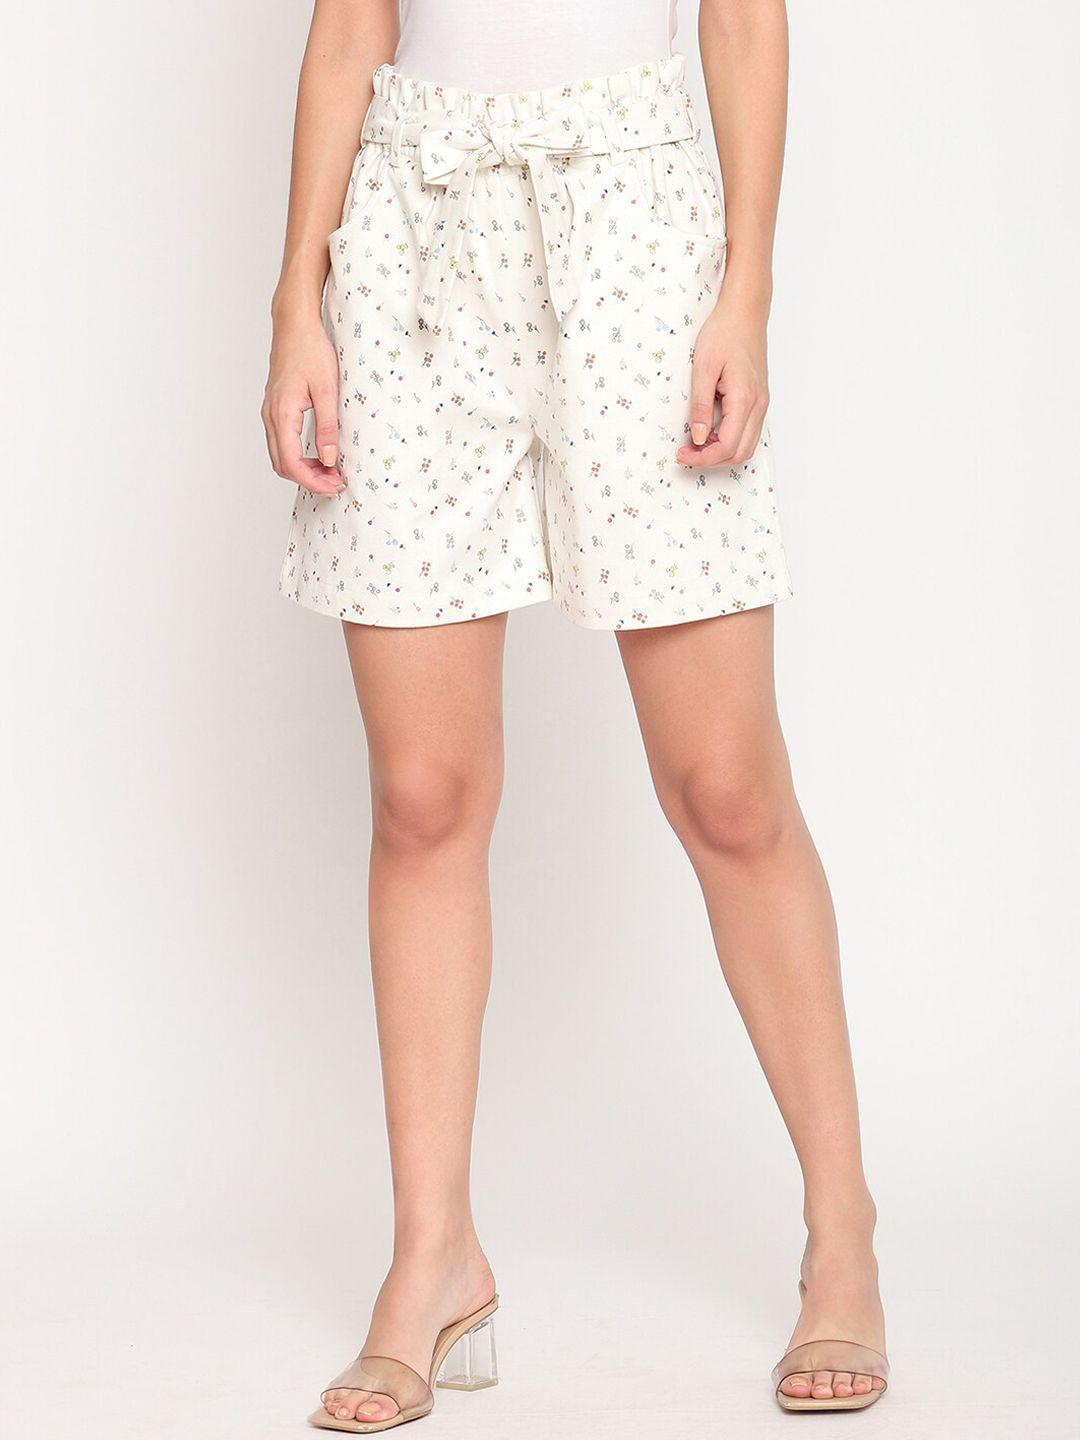 house of kkarma women off white floral printed mid-rise regular shorts